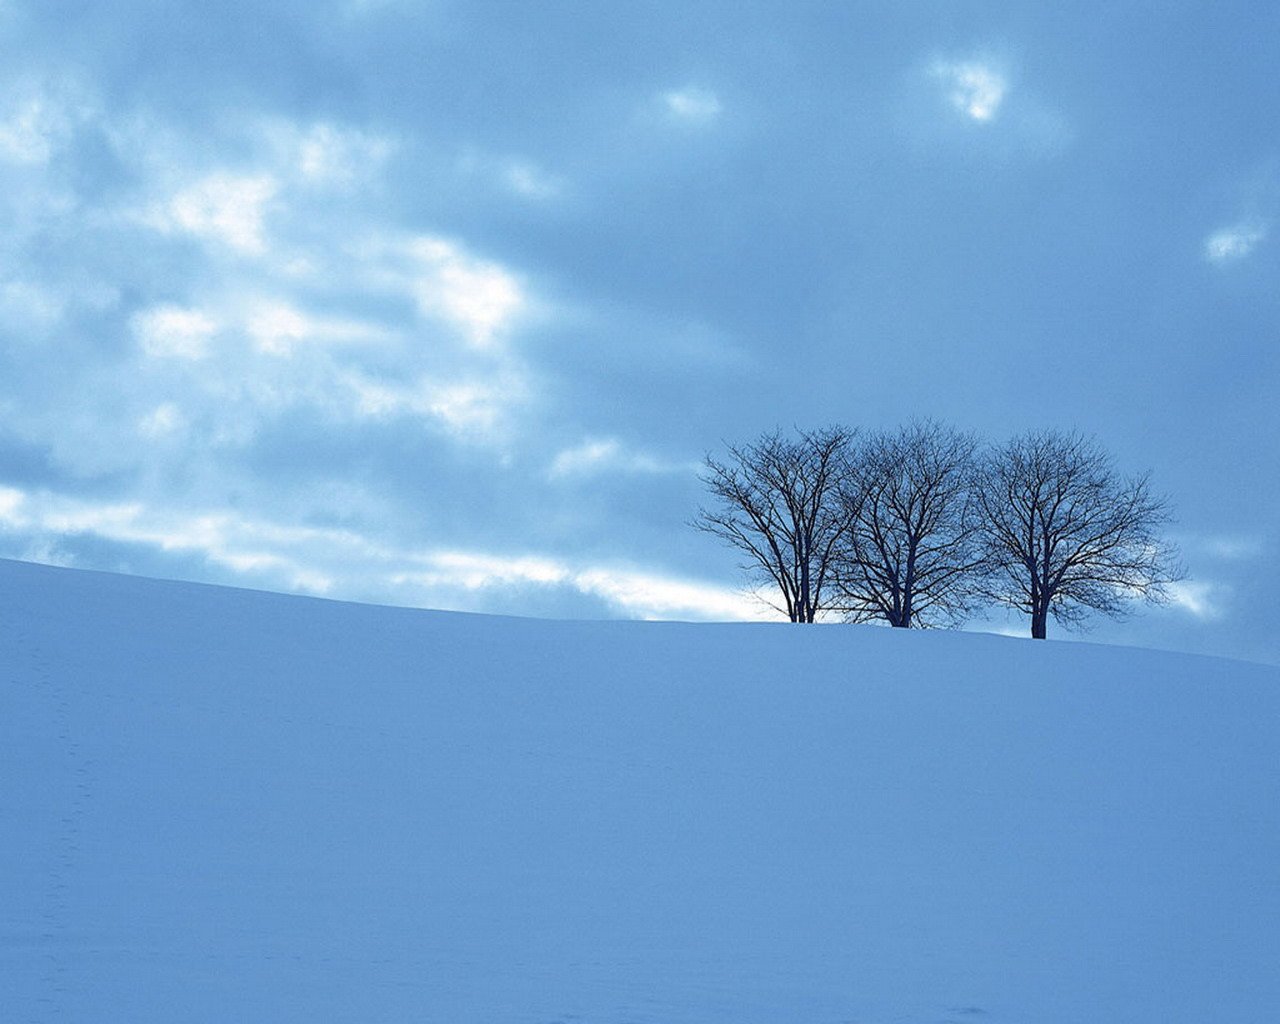 Snow Trees Wallpaper 9088 Hd Wallpapers in Nature   Imagescicom 1280x1024